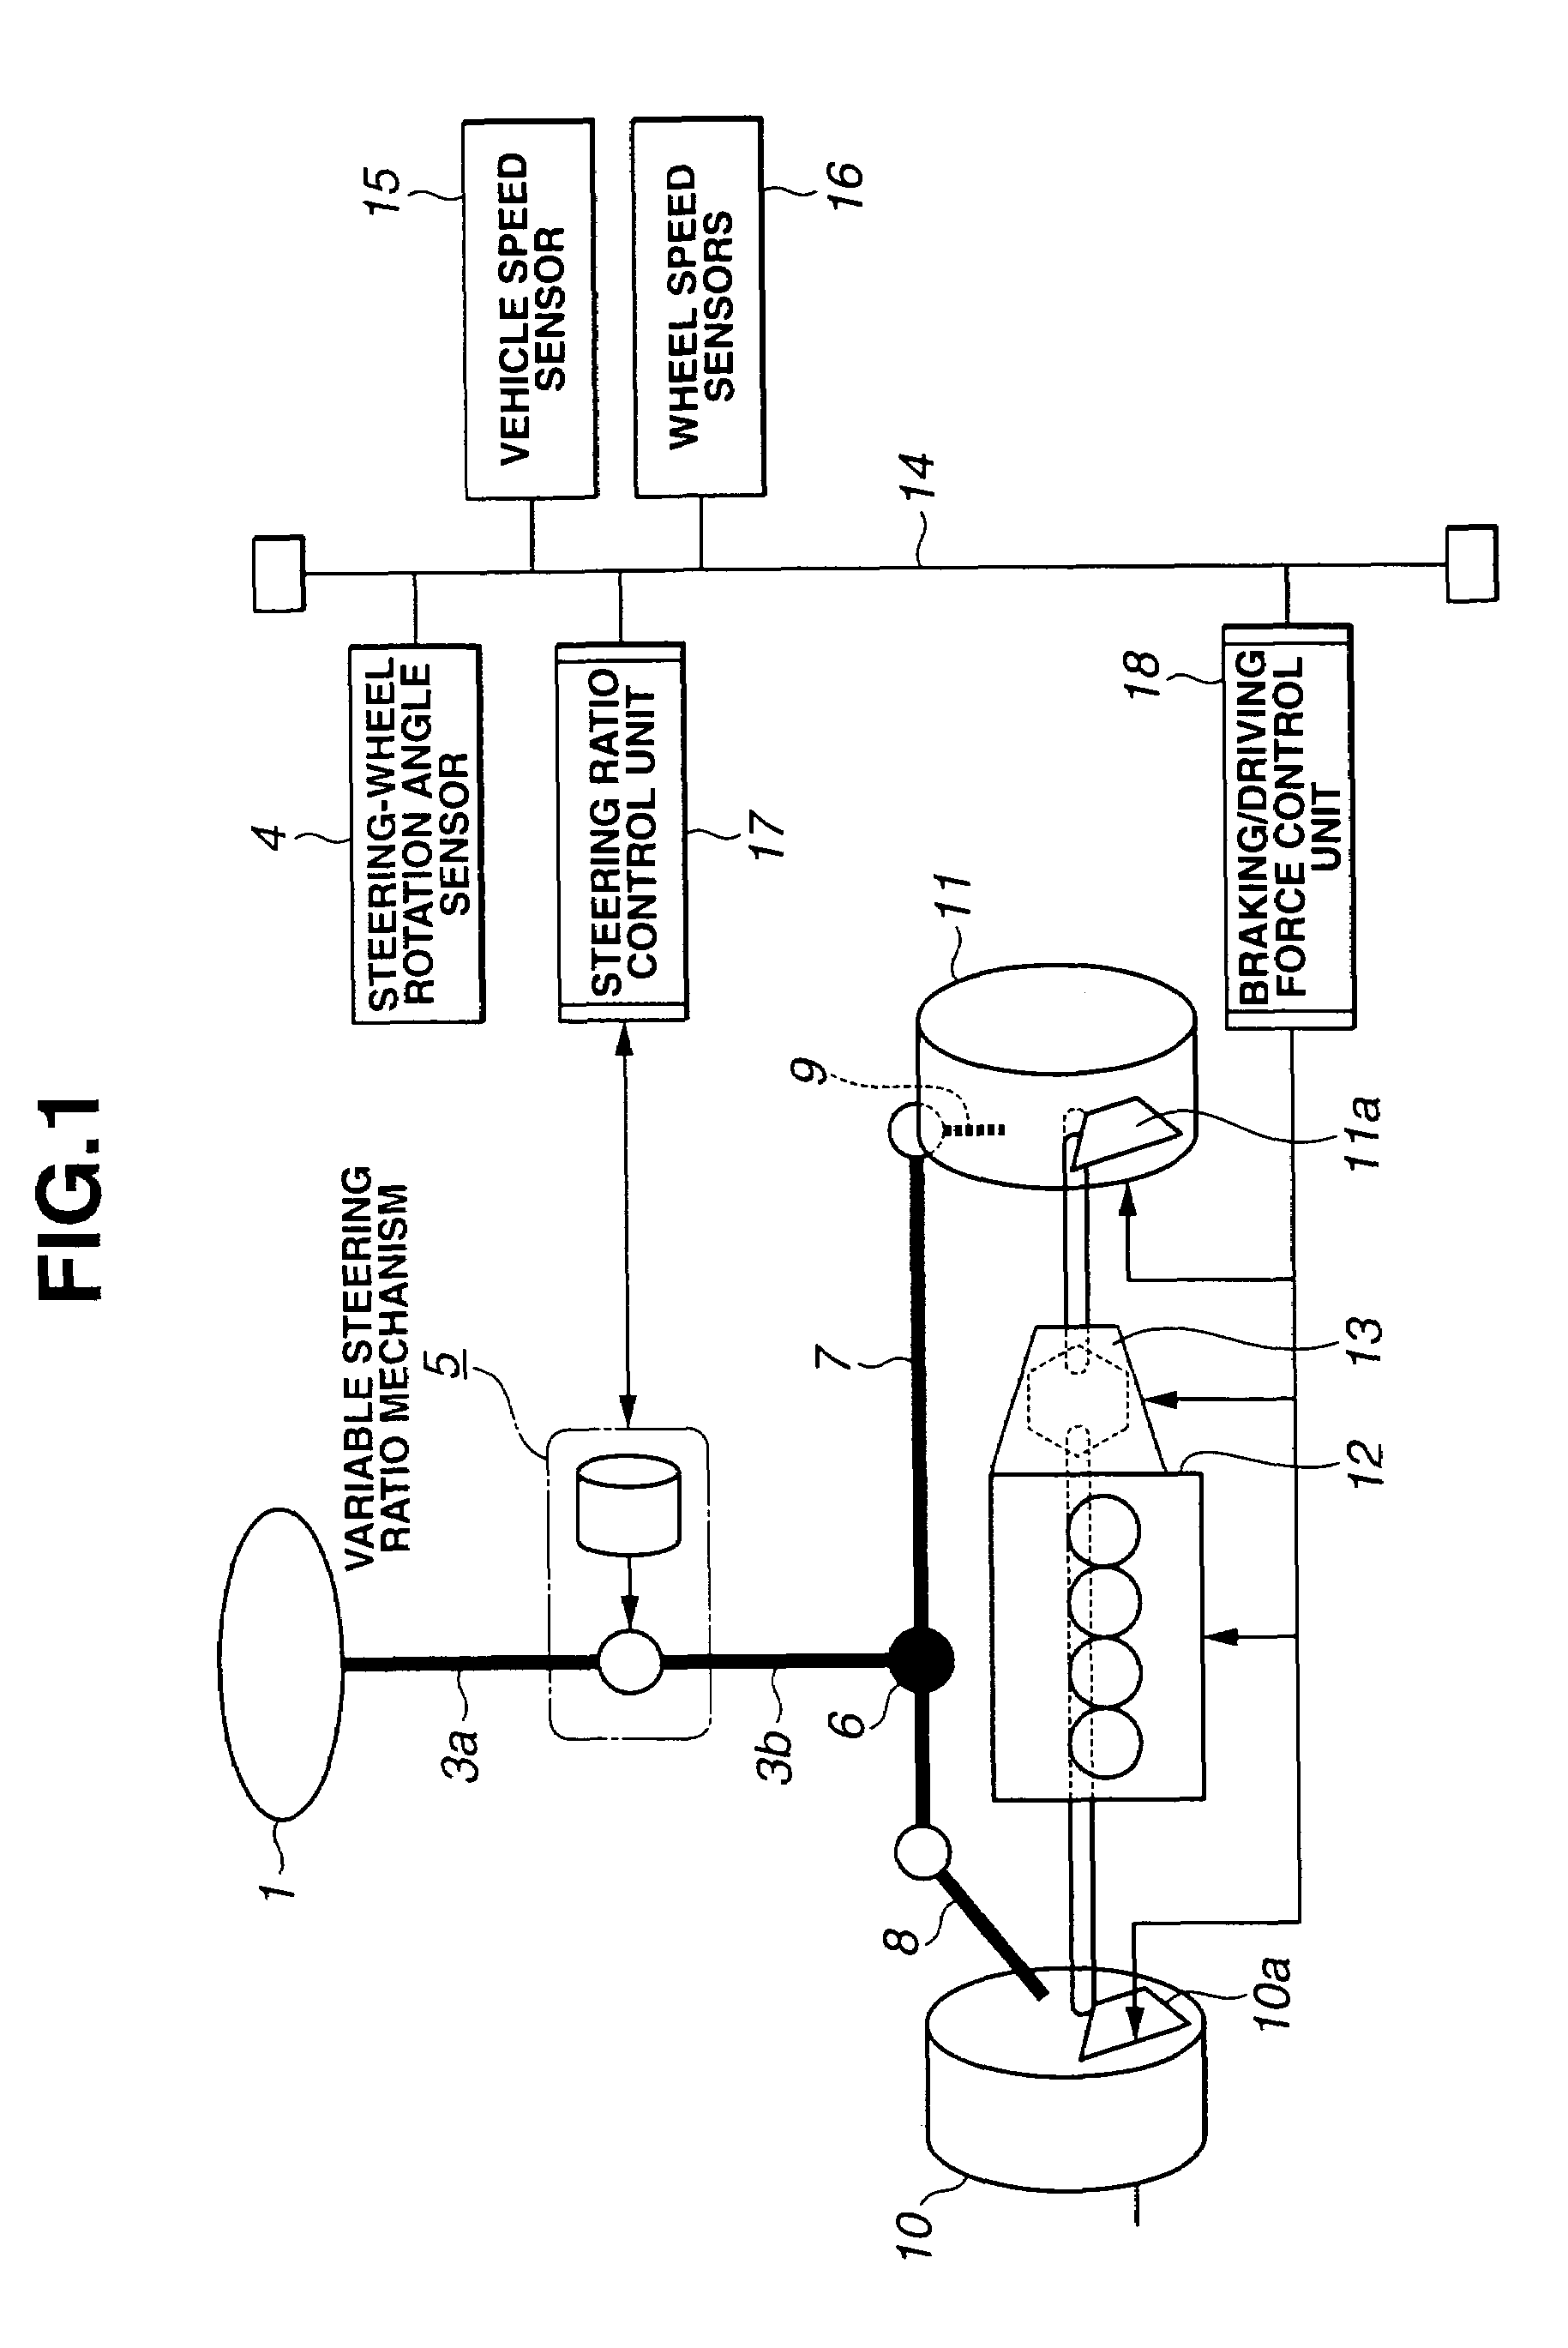 Steering ratio control system of vehicle